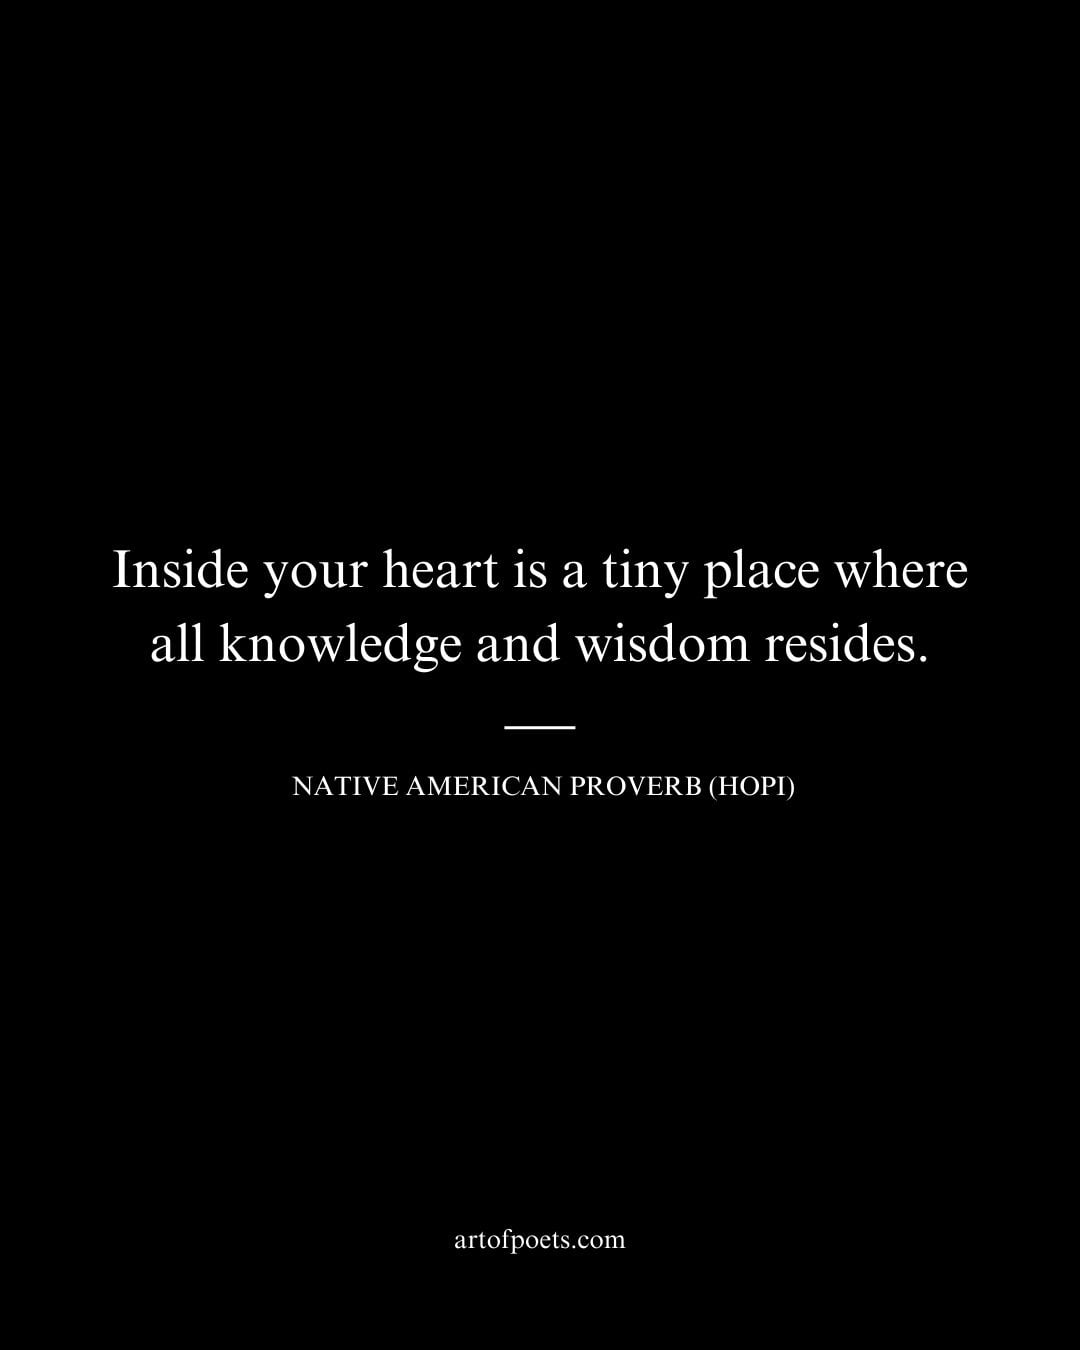 Inside your heart is a tiny place where all knowledge and wisdom resides